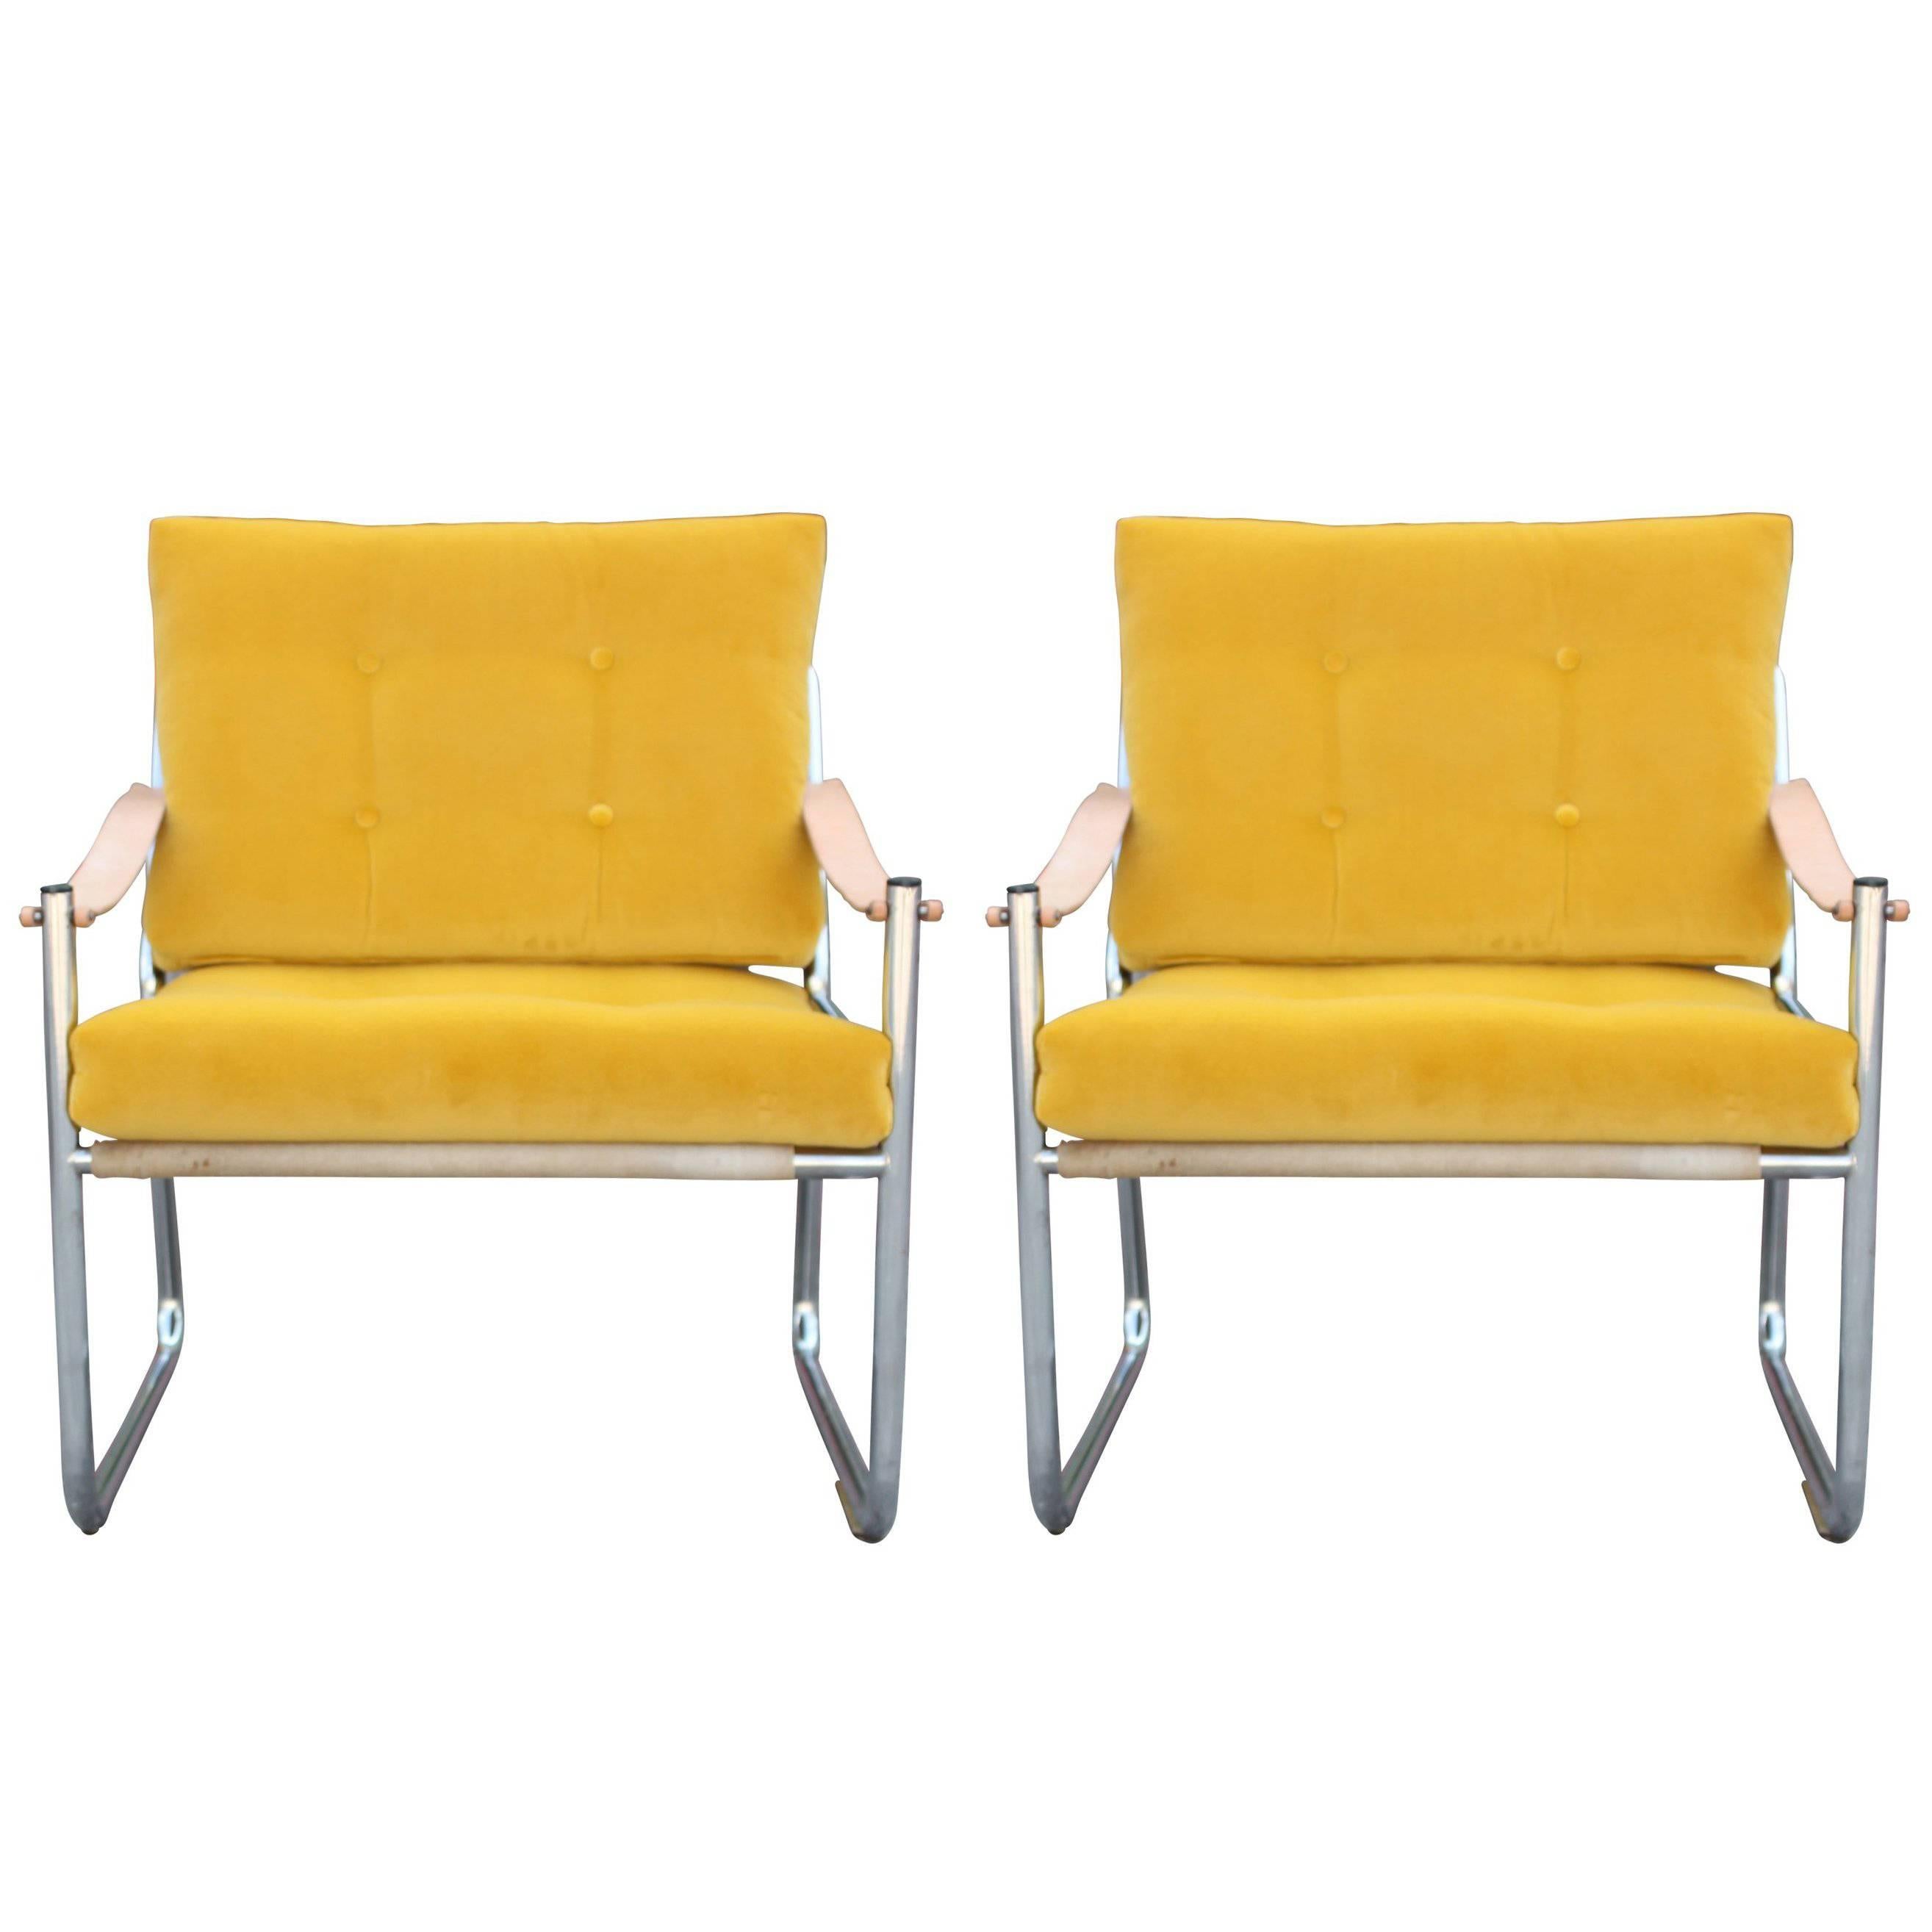 Pair of Modern Danish Safari Style Lounge Chairs with Leather Straps and Chrome